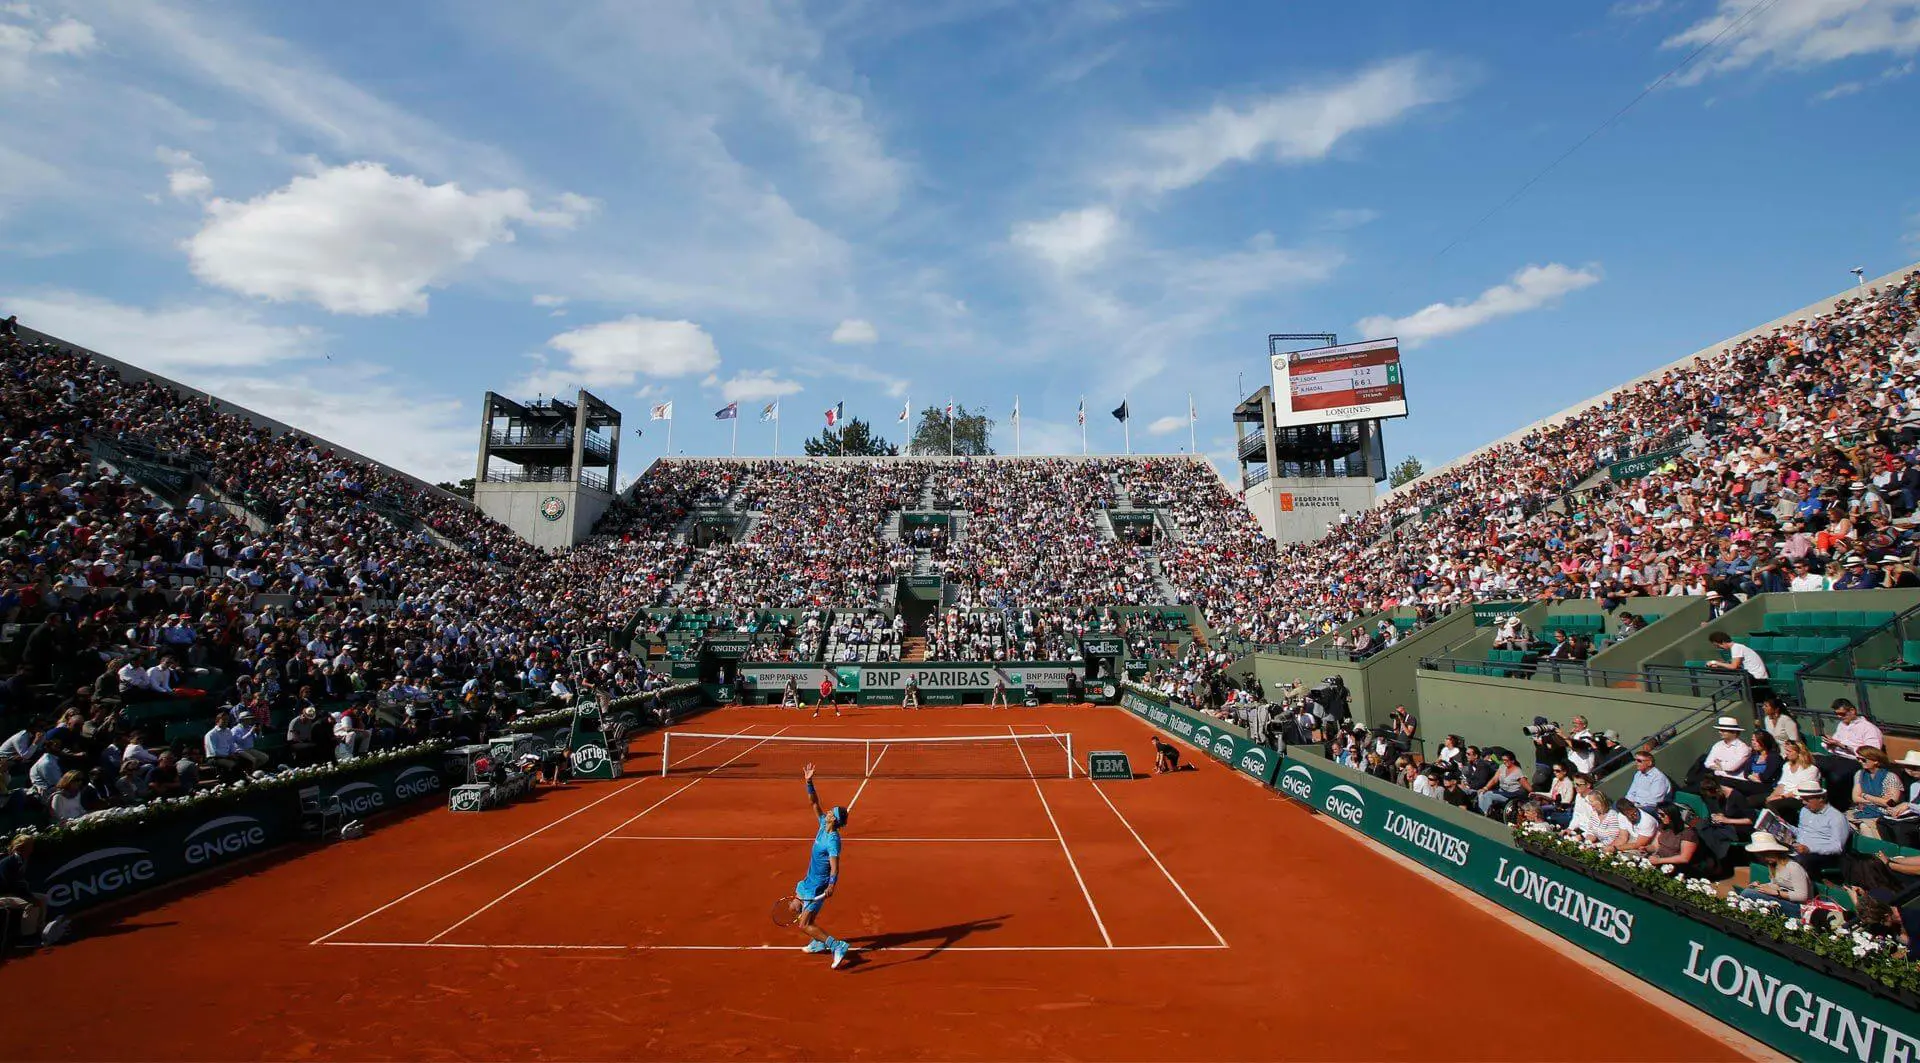 Image of the tennis court with a crowd watching the tennis match